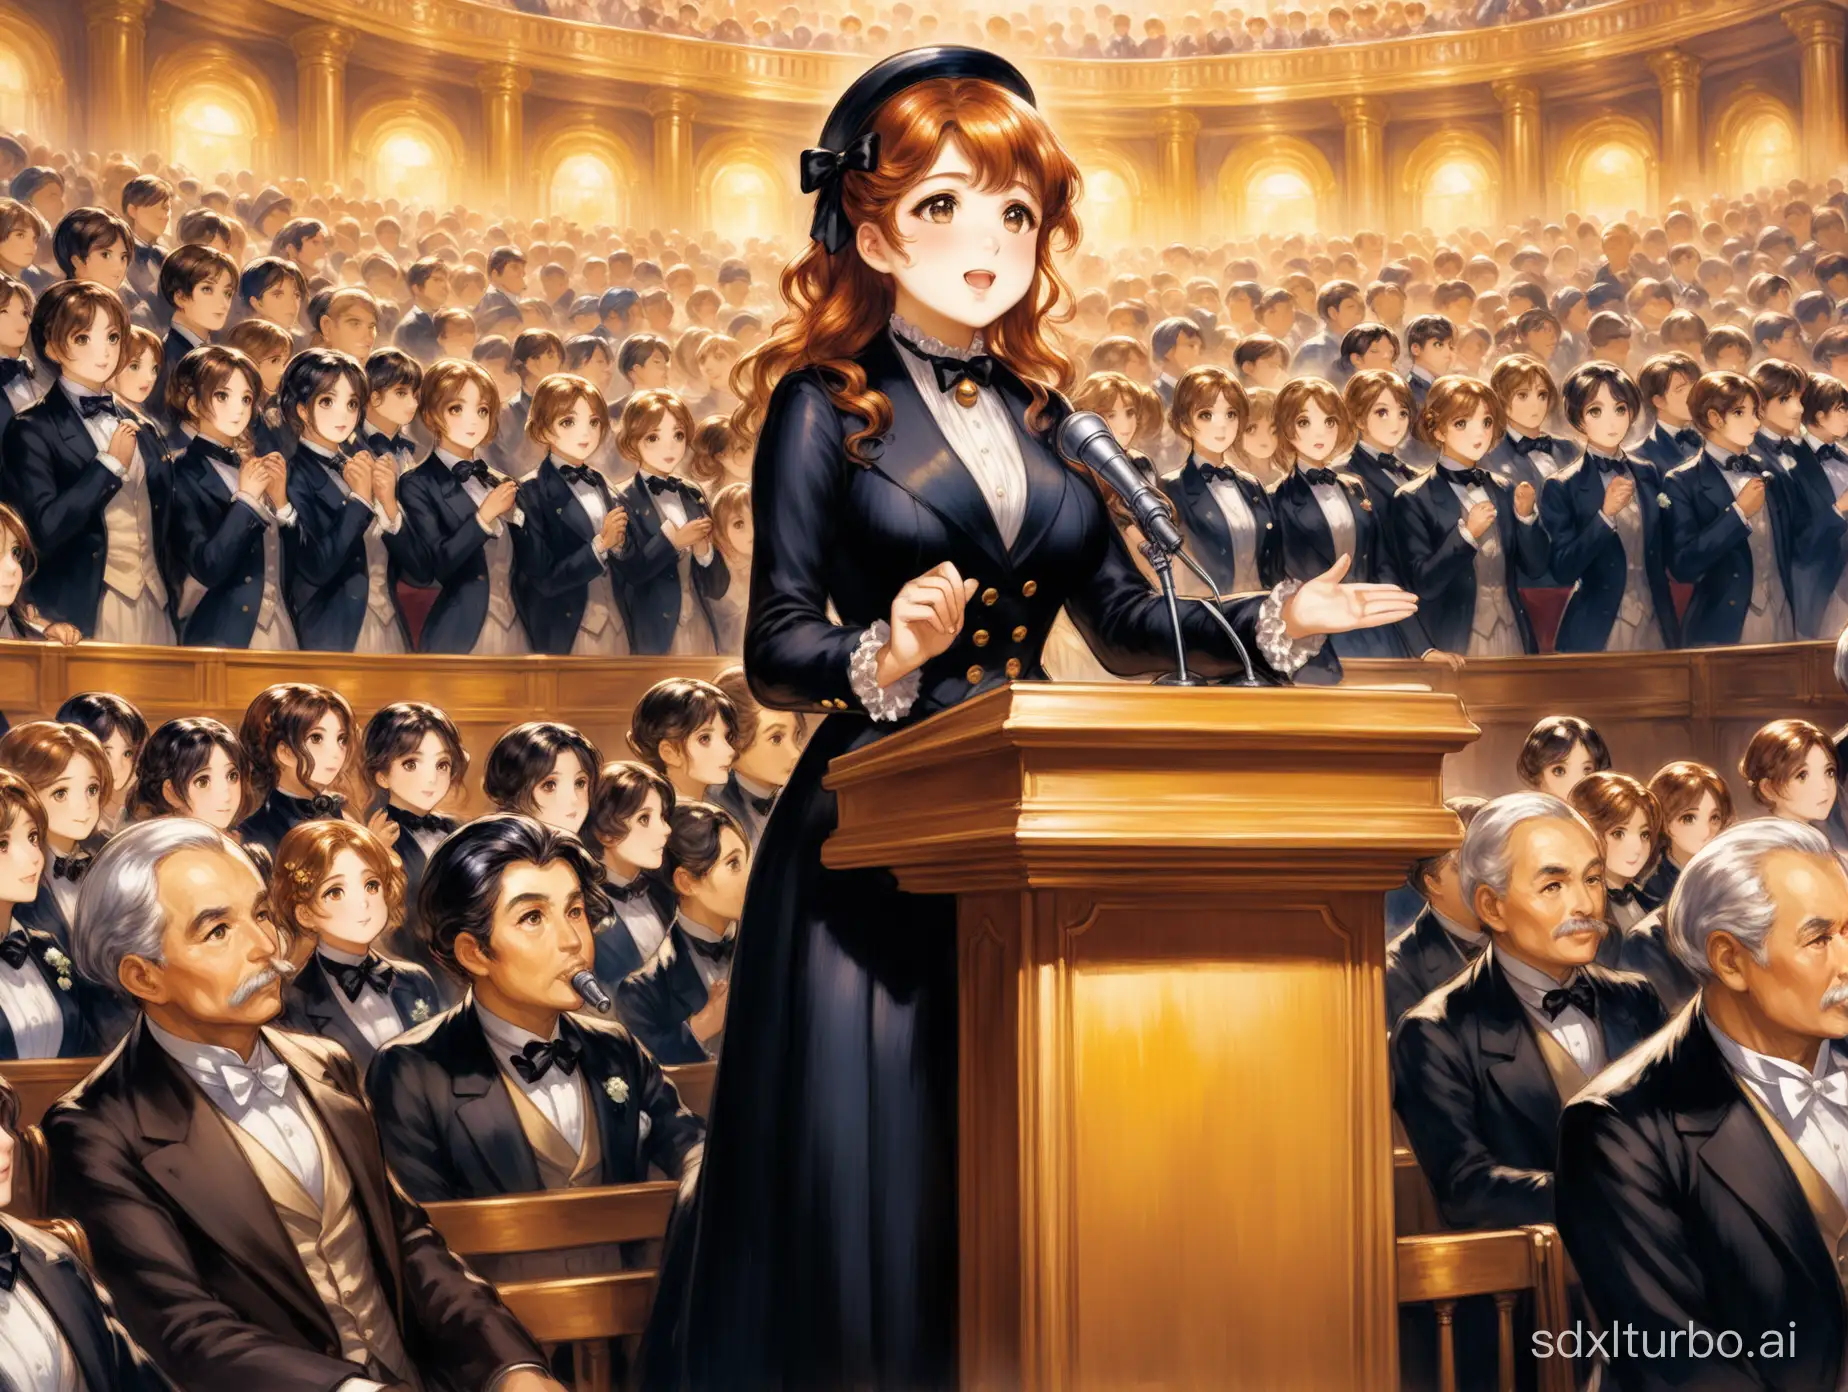 Anime-Style-Belle-poque-Painting-Future-Speech-by-Girl-in-Suit